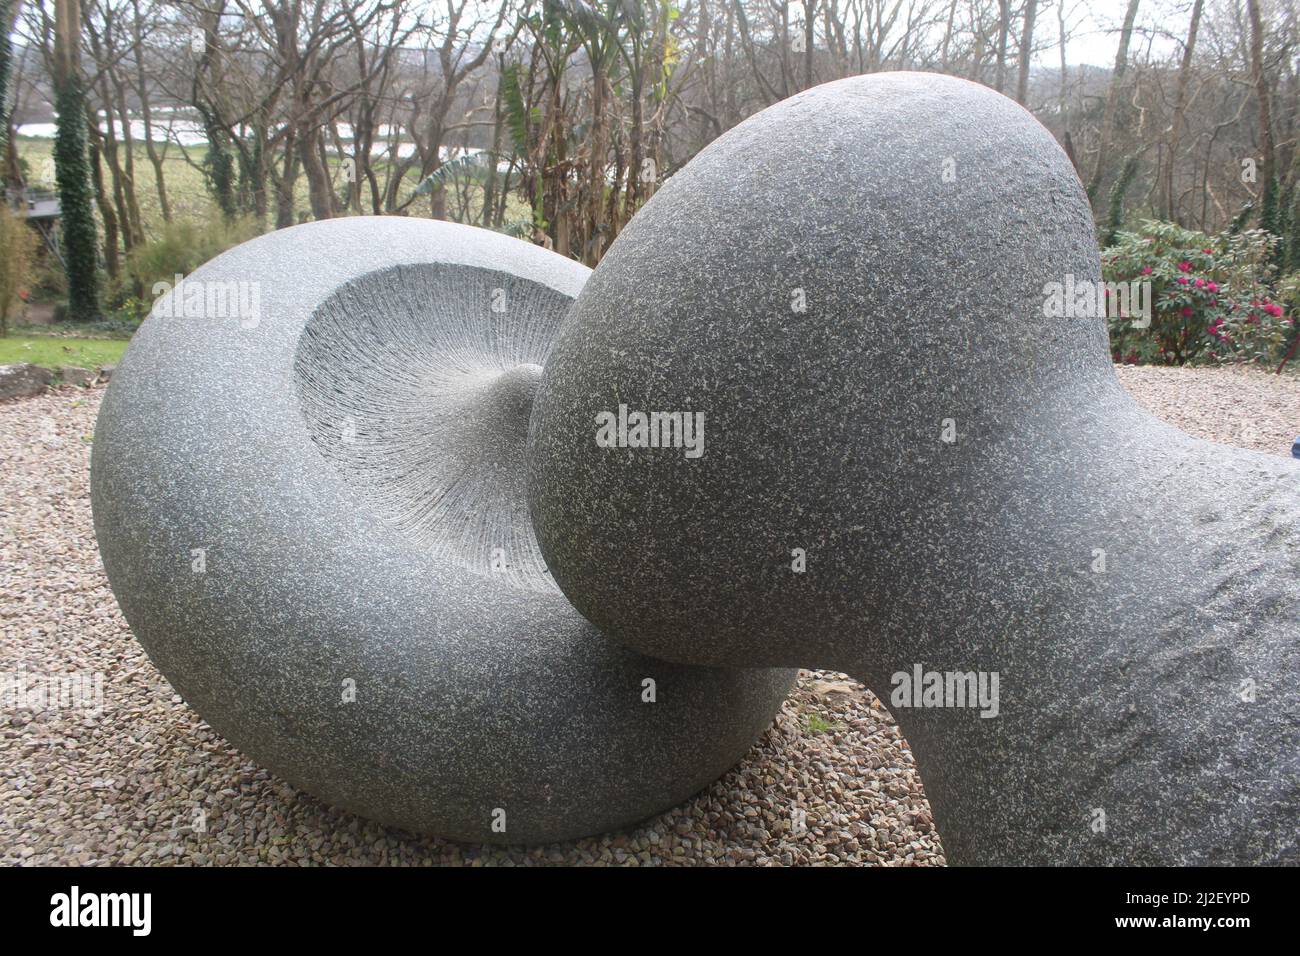 Peter Randall page - Slip of the LIP Banque D'Images